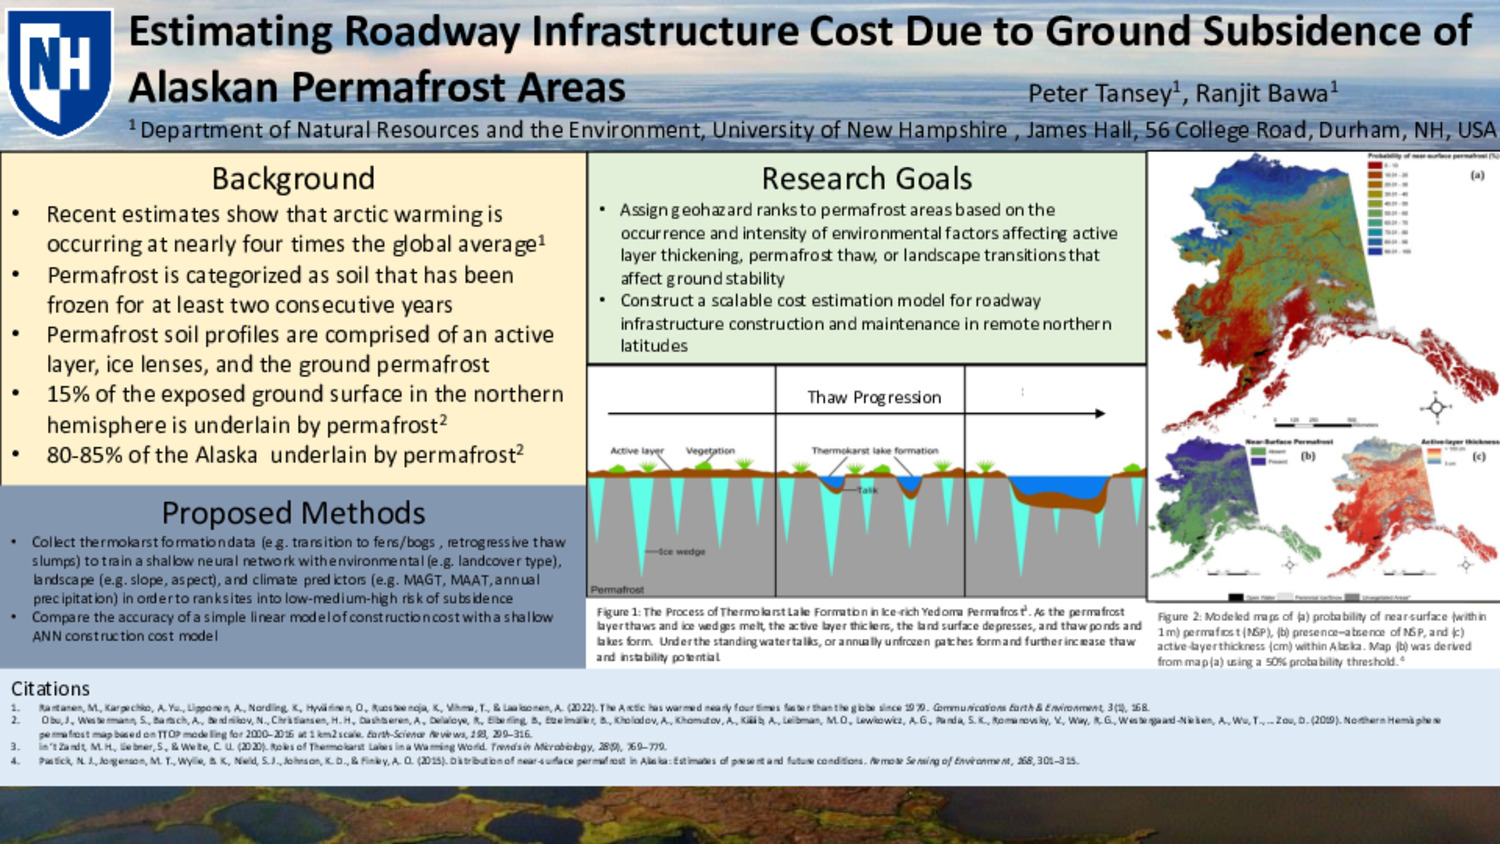 Estimating Roadway Infrastructure Cost Due To Ground Subsidence Of Alaskan Permafrost Areas by pet1003